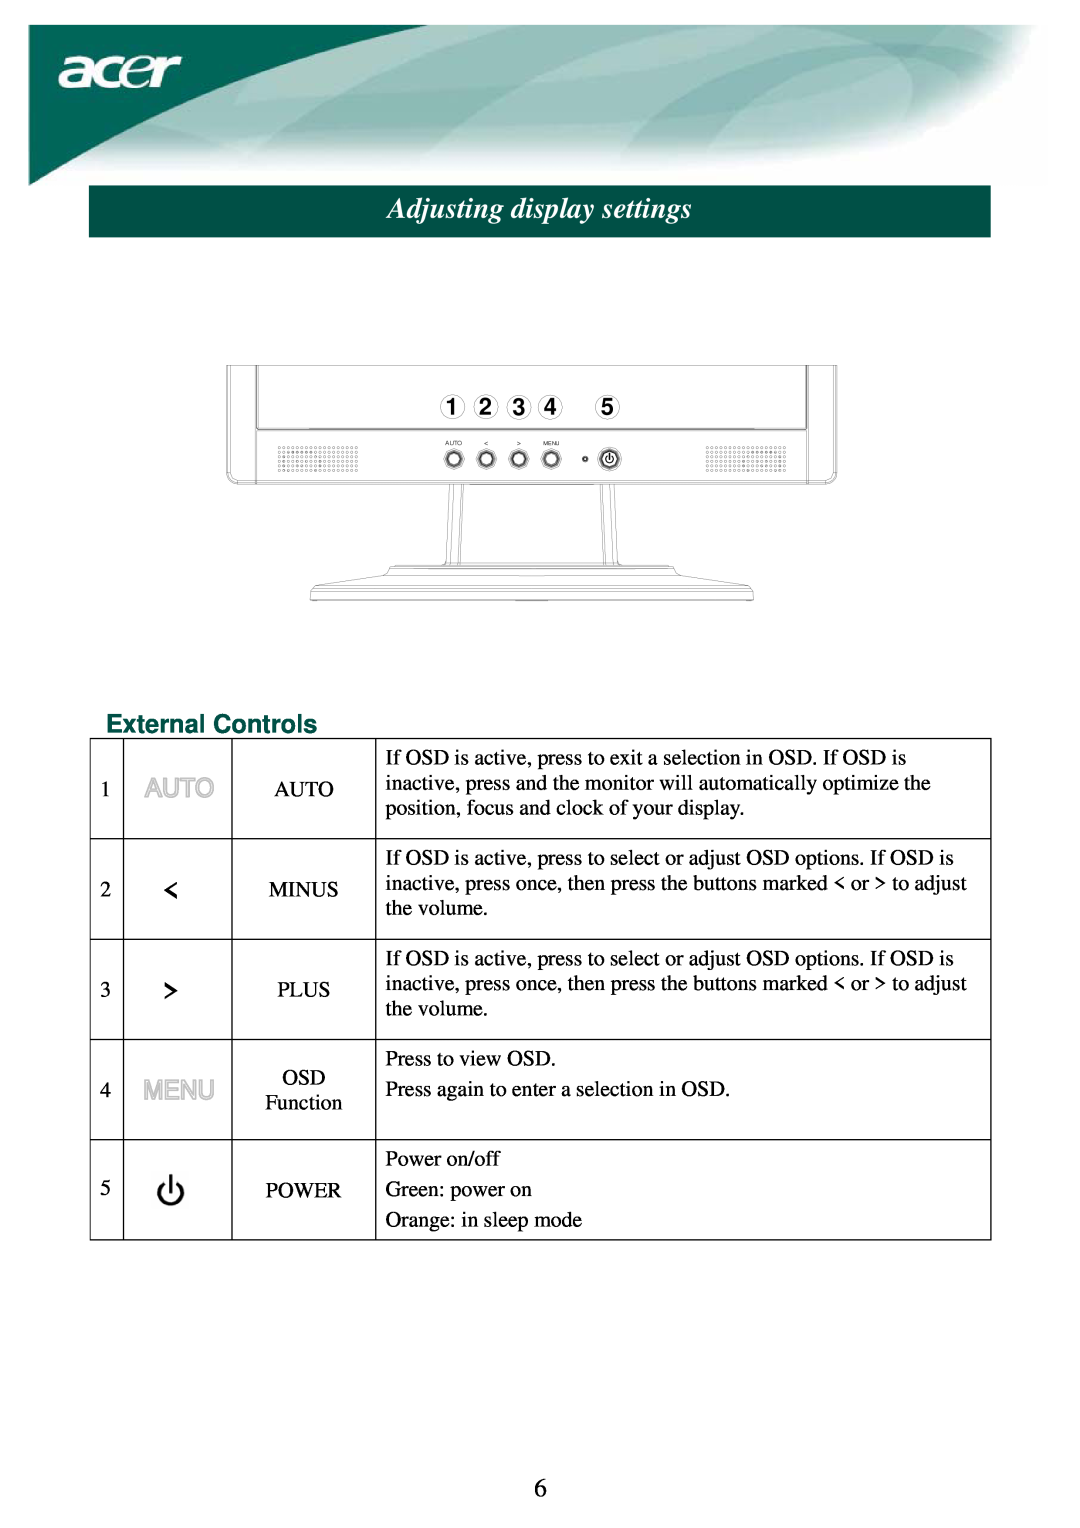 Acer LCD Monito specifications Adjusting display settings, External Controls 